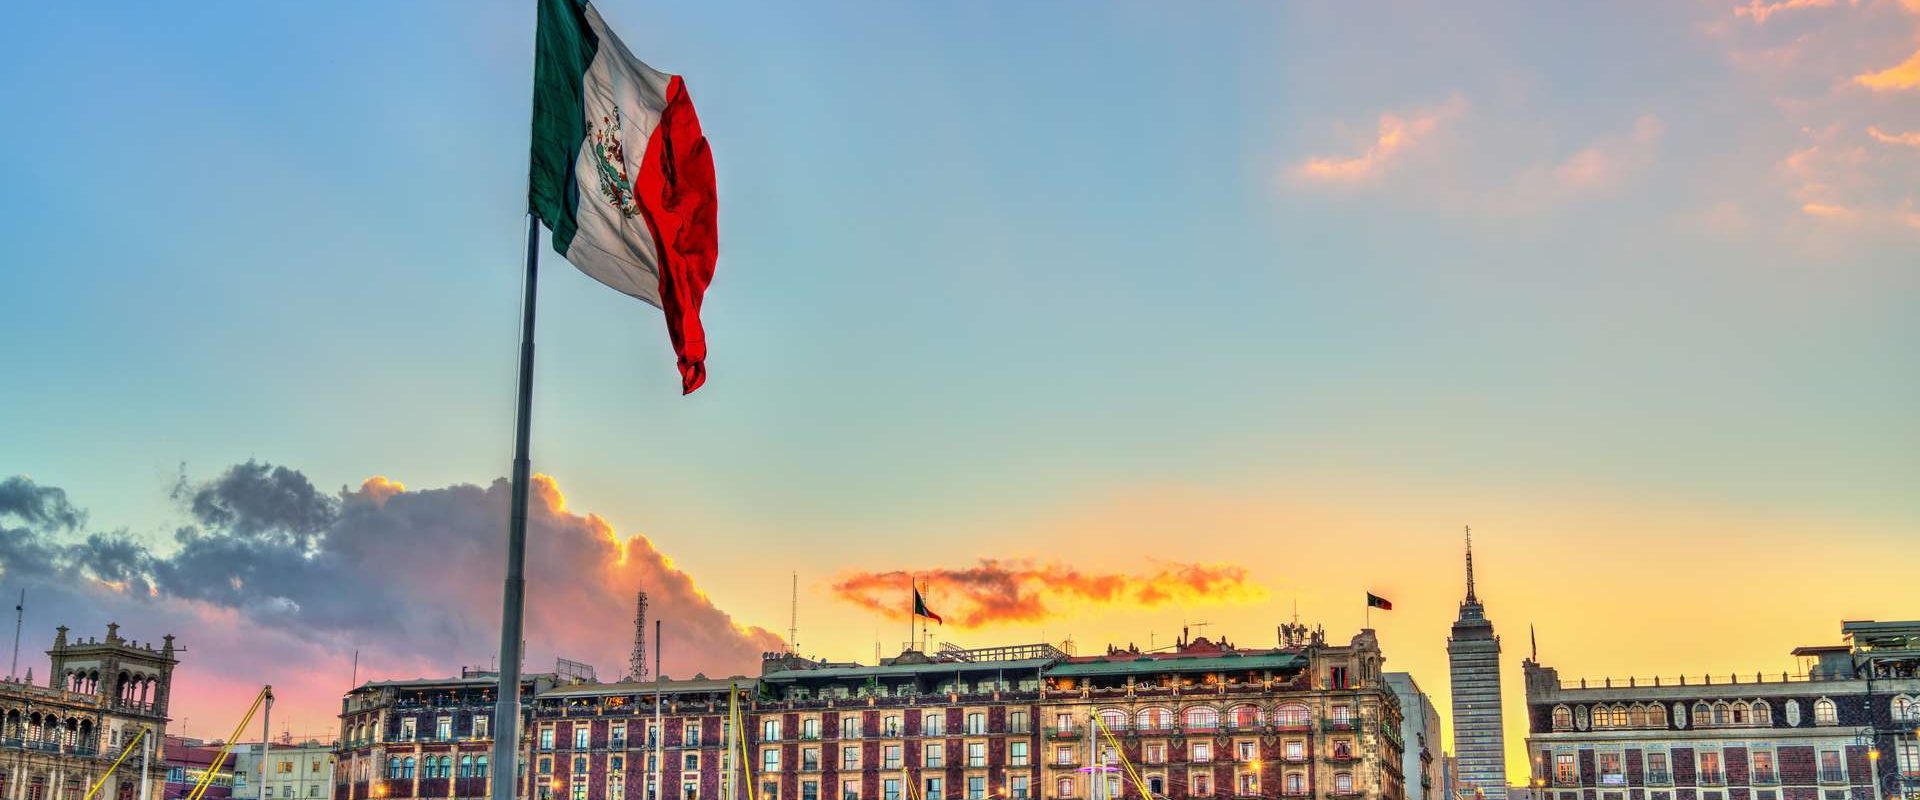 Flagpole on Constitution or Zocalo Square in Mexico City